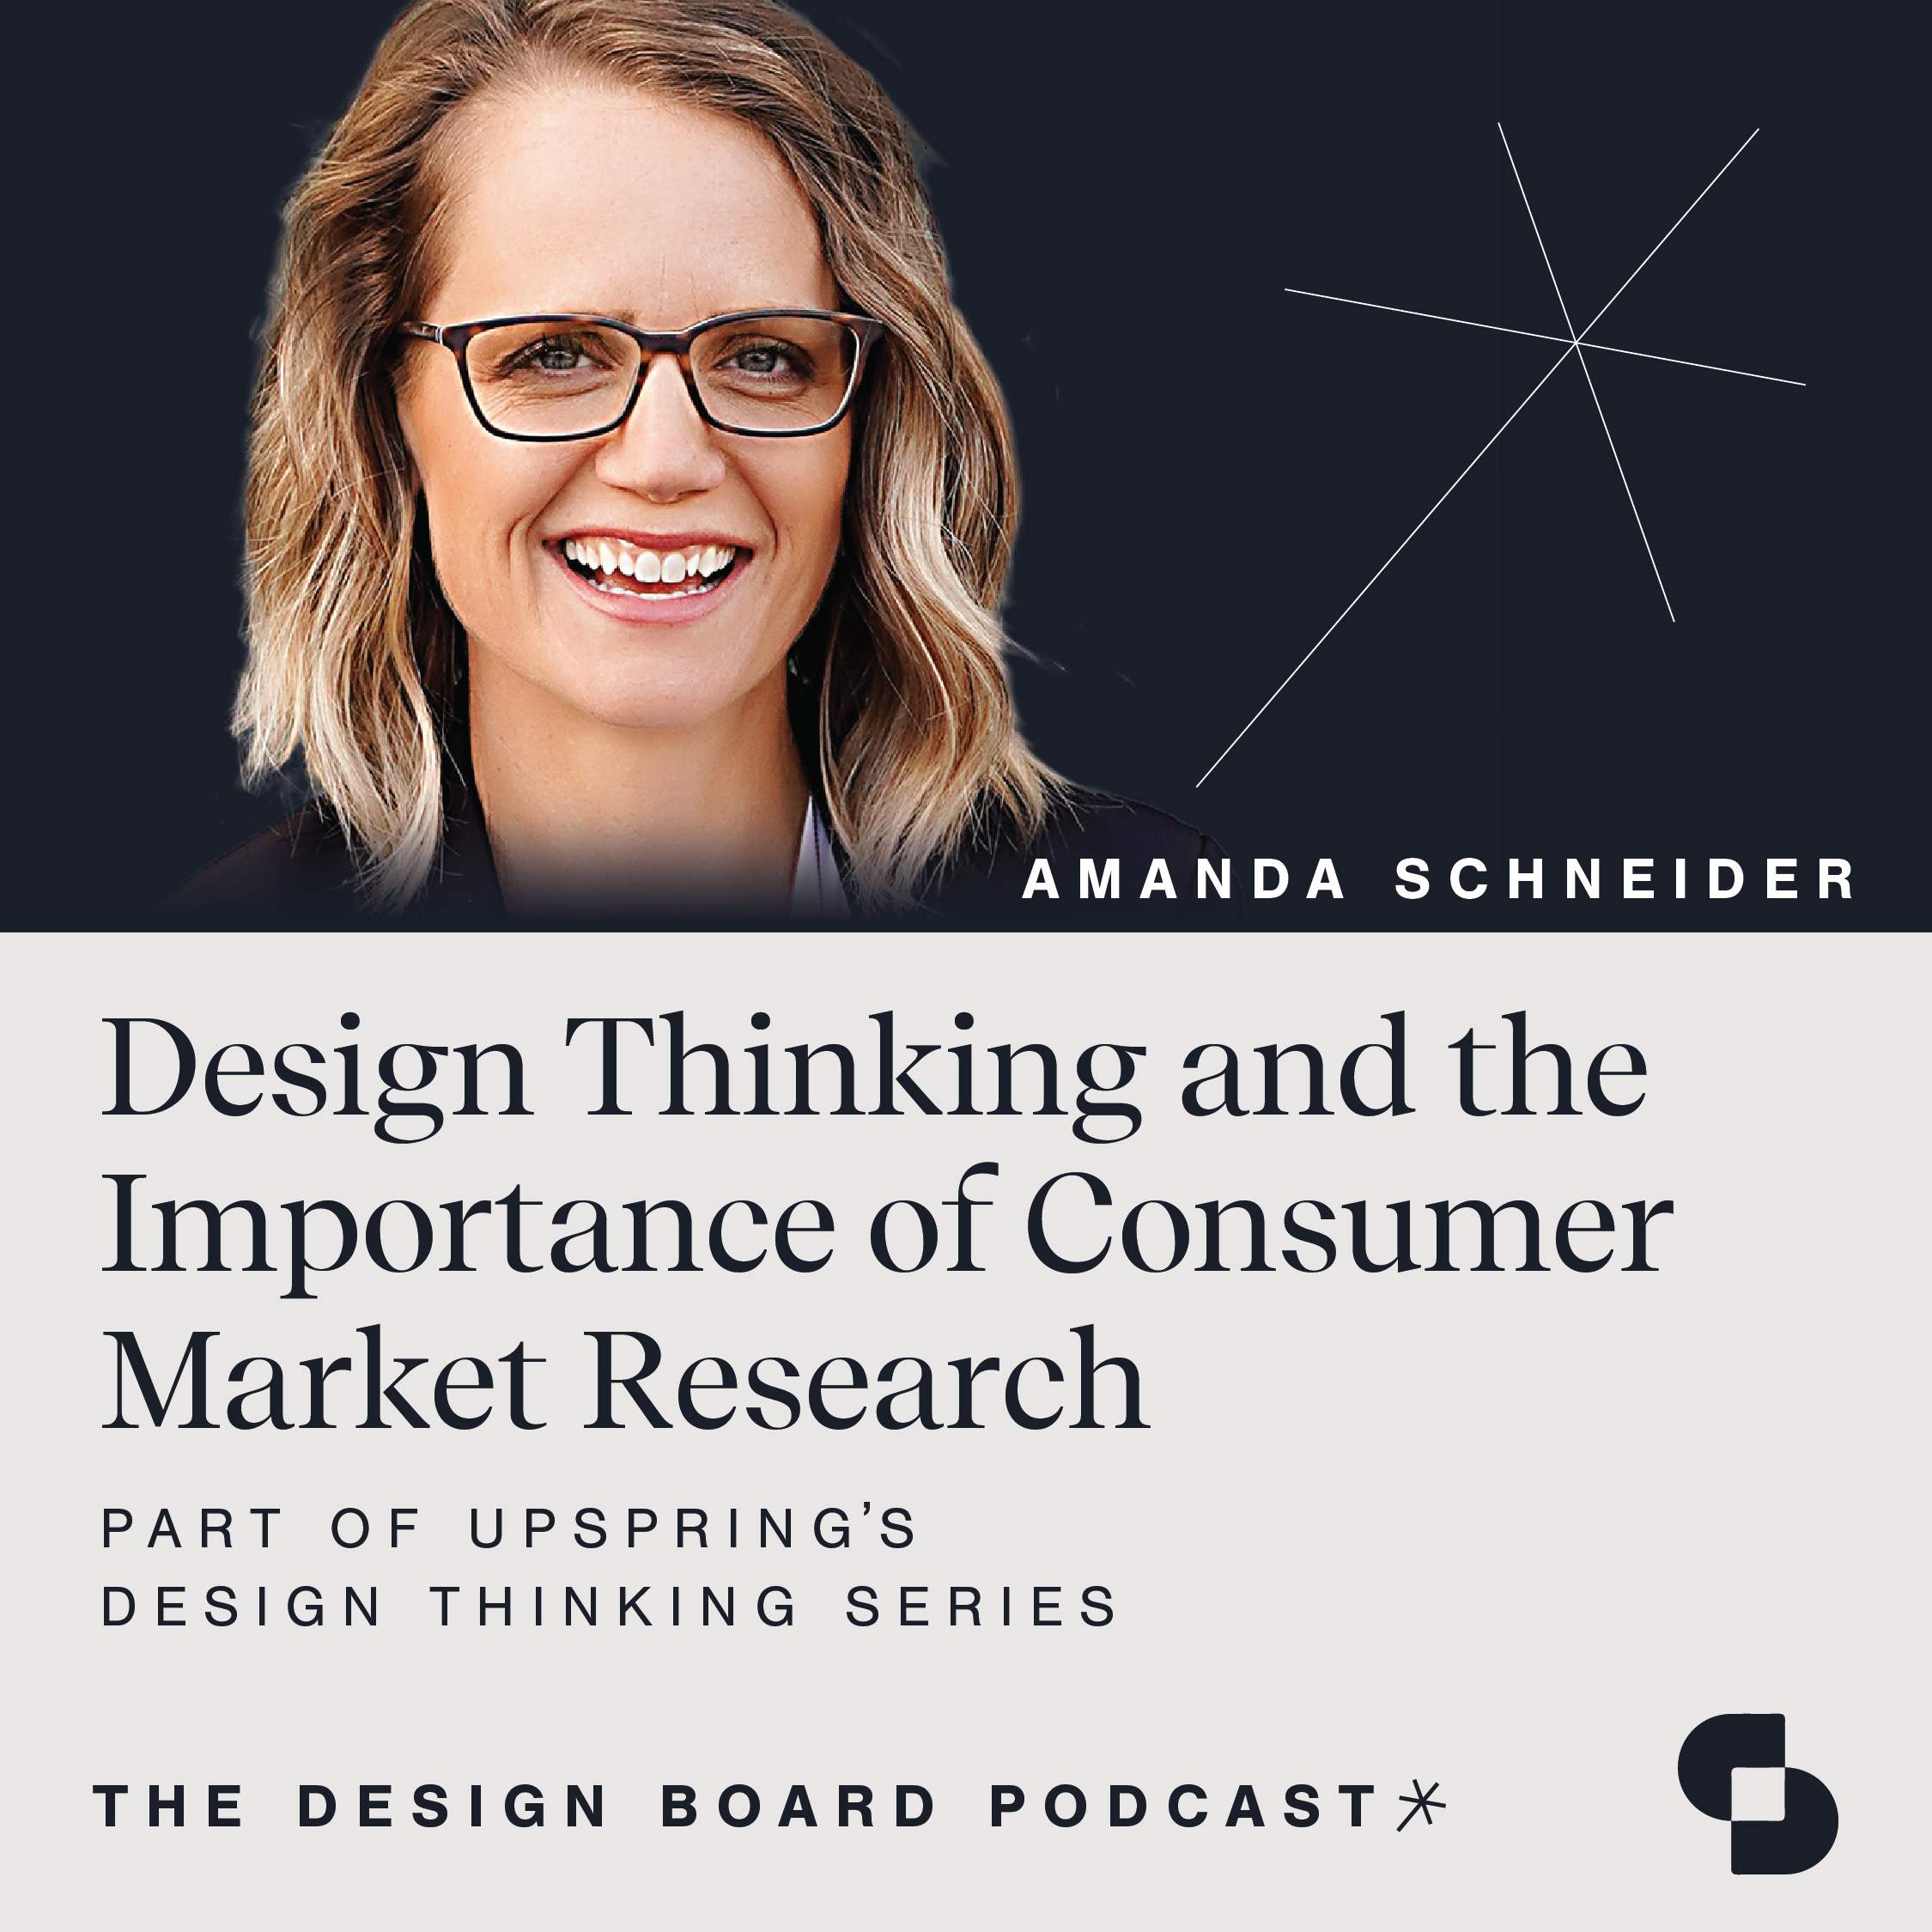 Design Thinking | Design Thinking and The Importance of Consumer Market Research episode cover art for The Design Board podcast